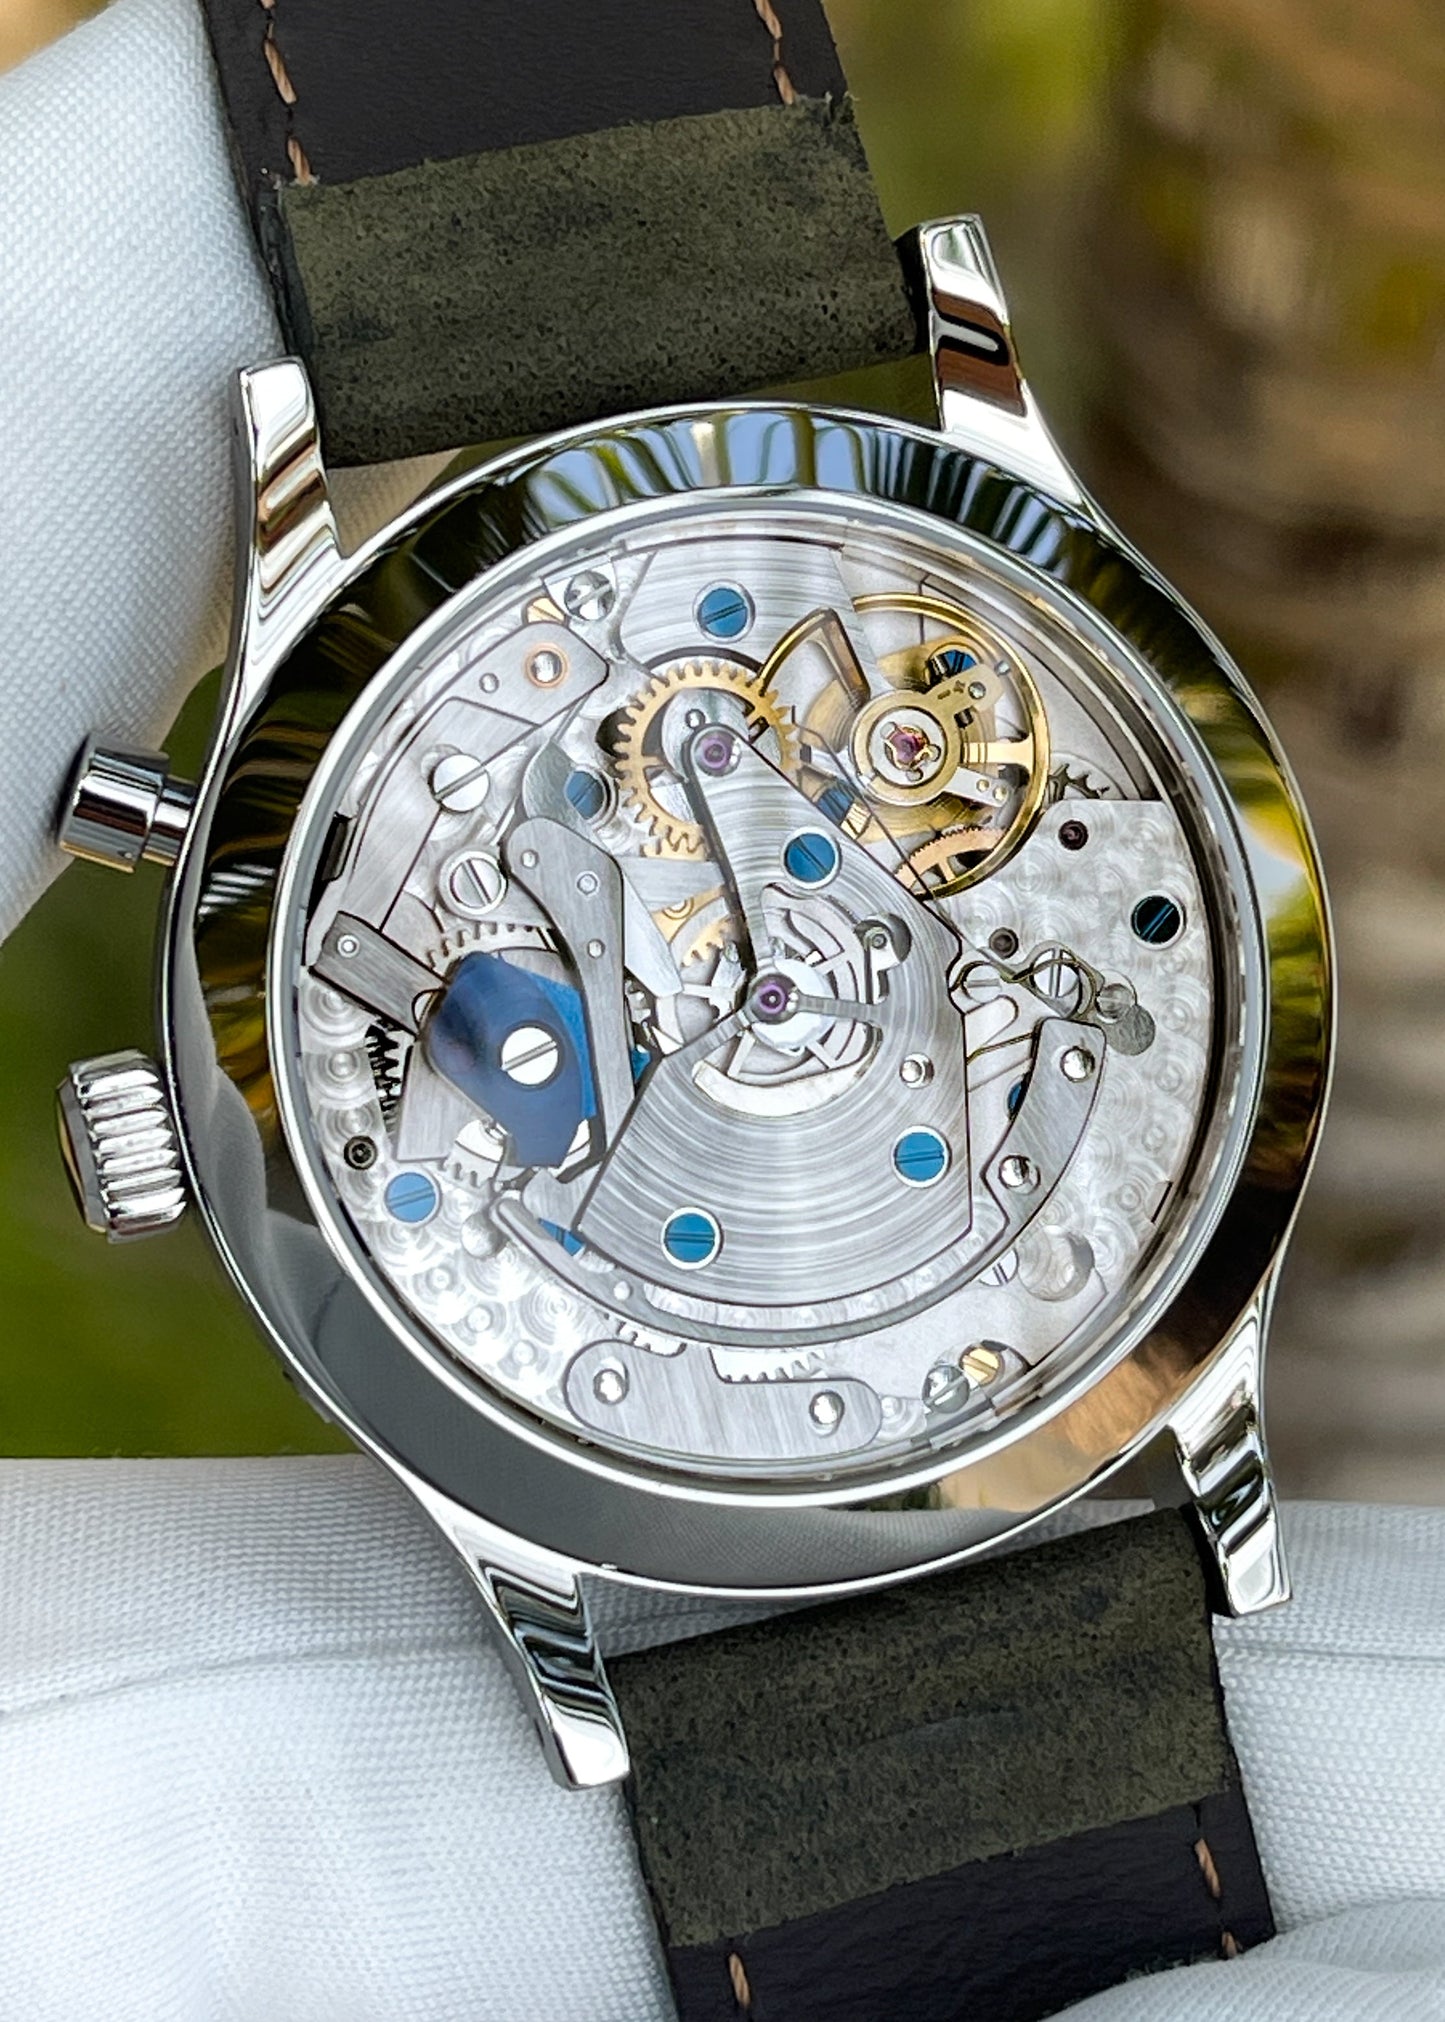 Habring² Chrono-Felix Perpetual w/ Blued Hour & Minute Hands (ARRIVING SEPTEMBER)